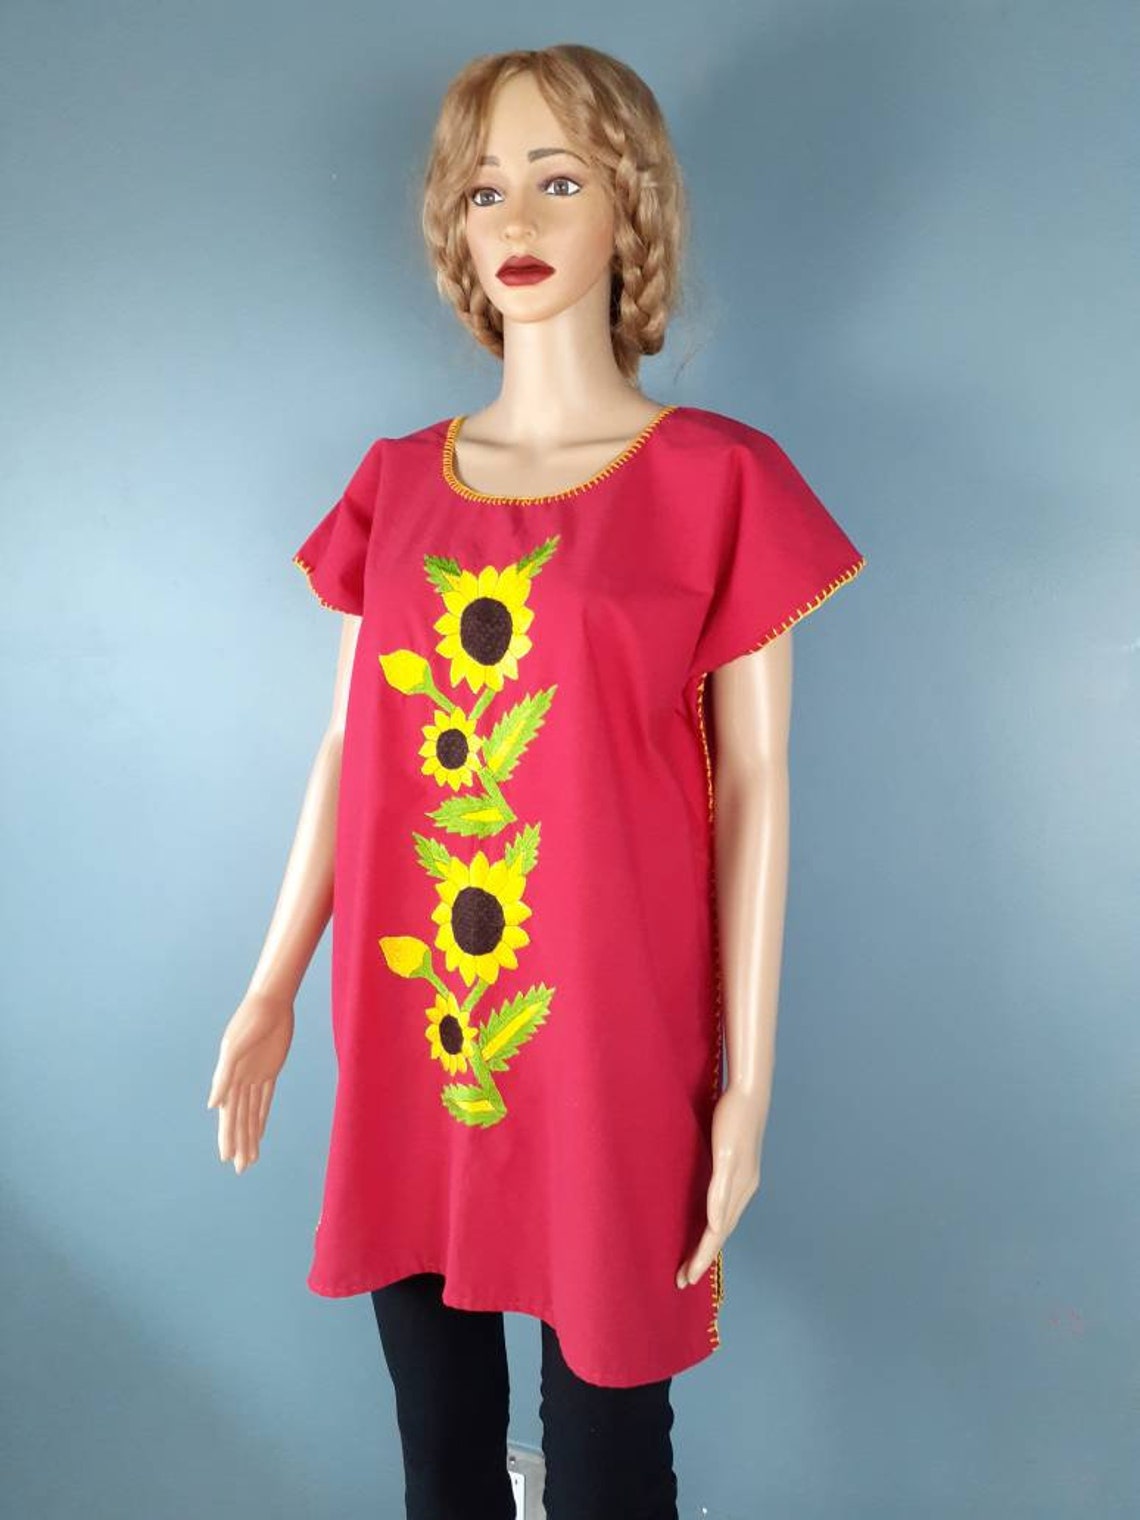 Girasol Red Huipil Red Tunic Blouse Sunflowers hand | Etsy